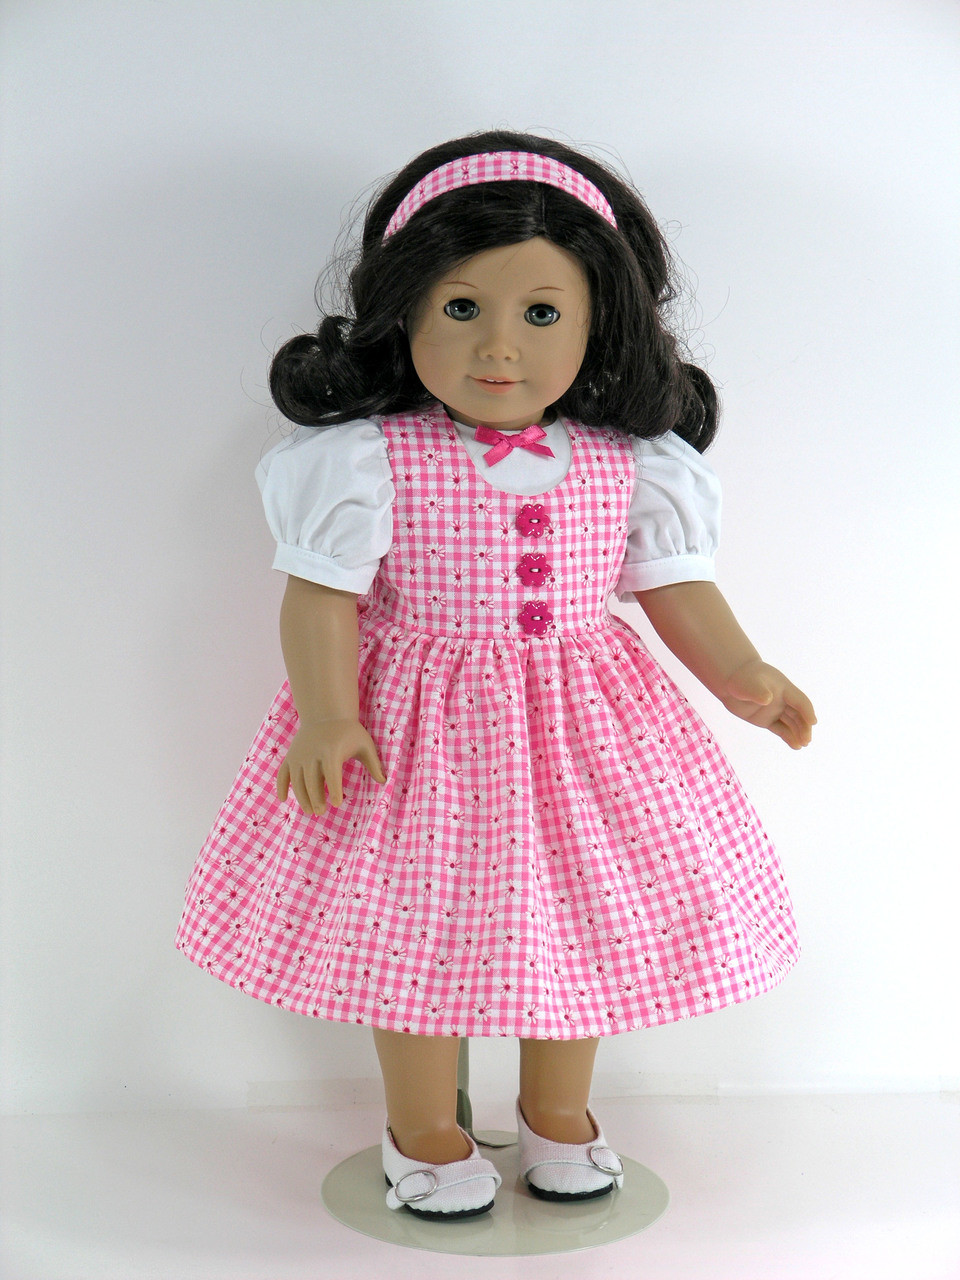 Handmade 18 inch Doll Clothes for American Girl - Sundress or